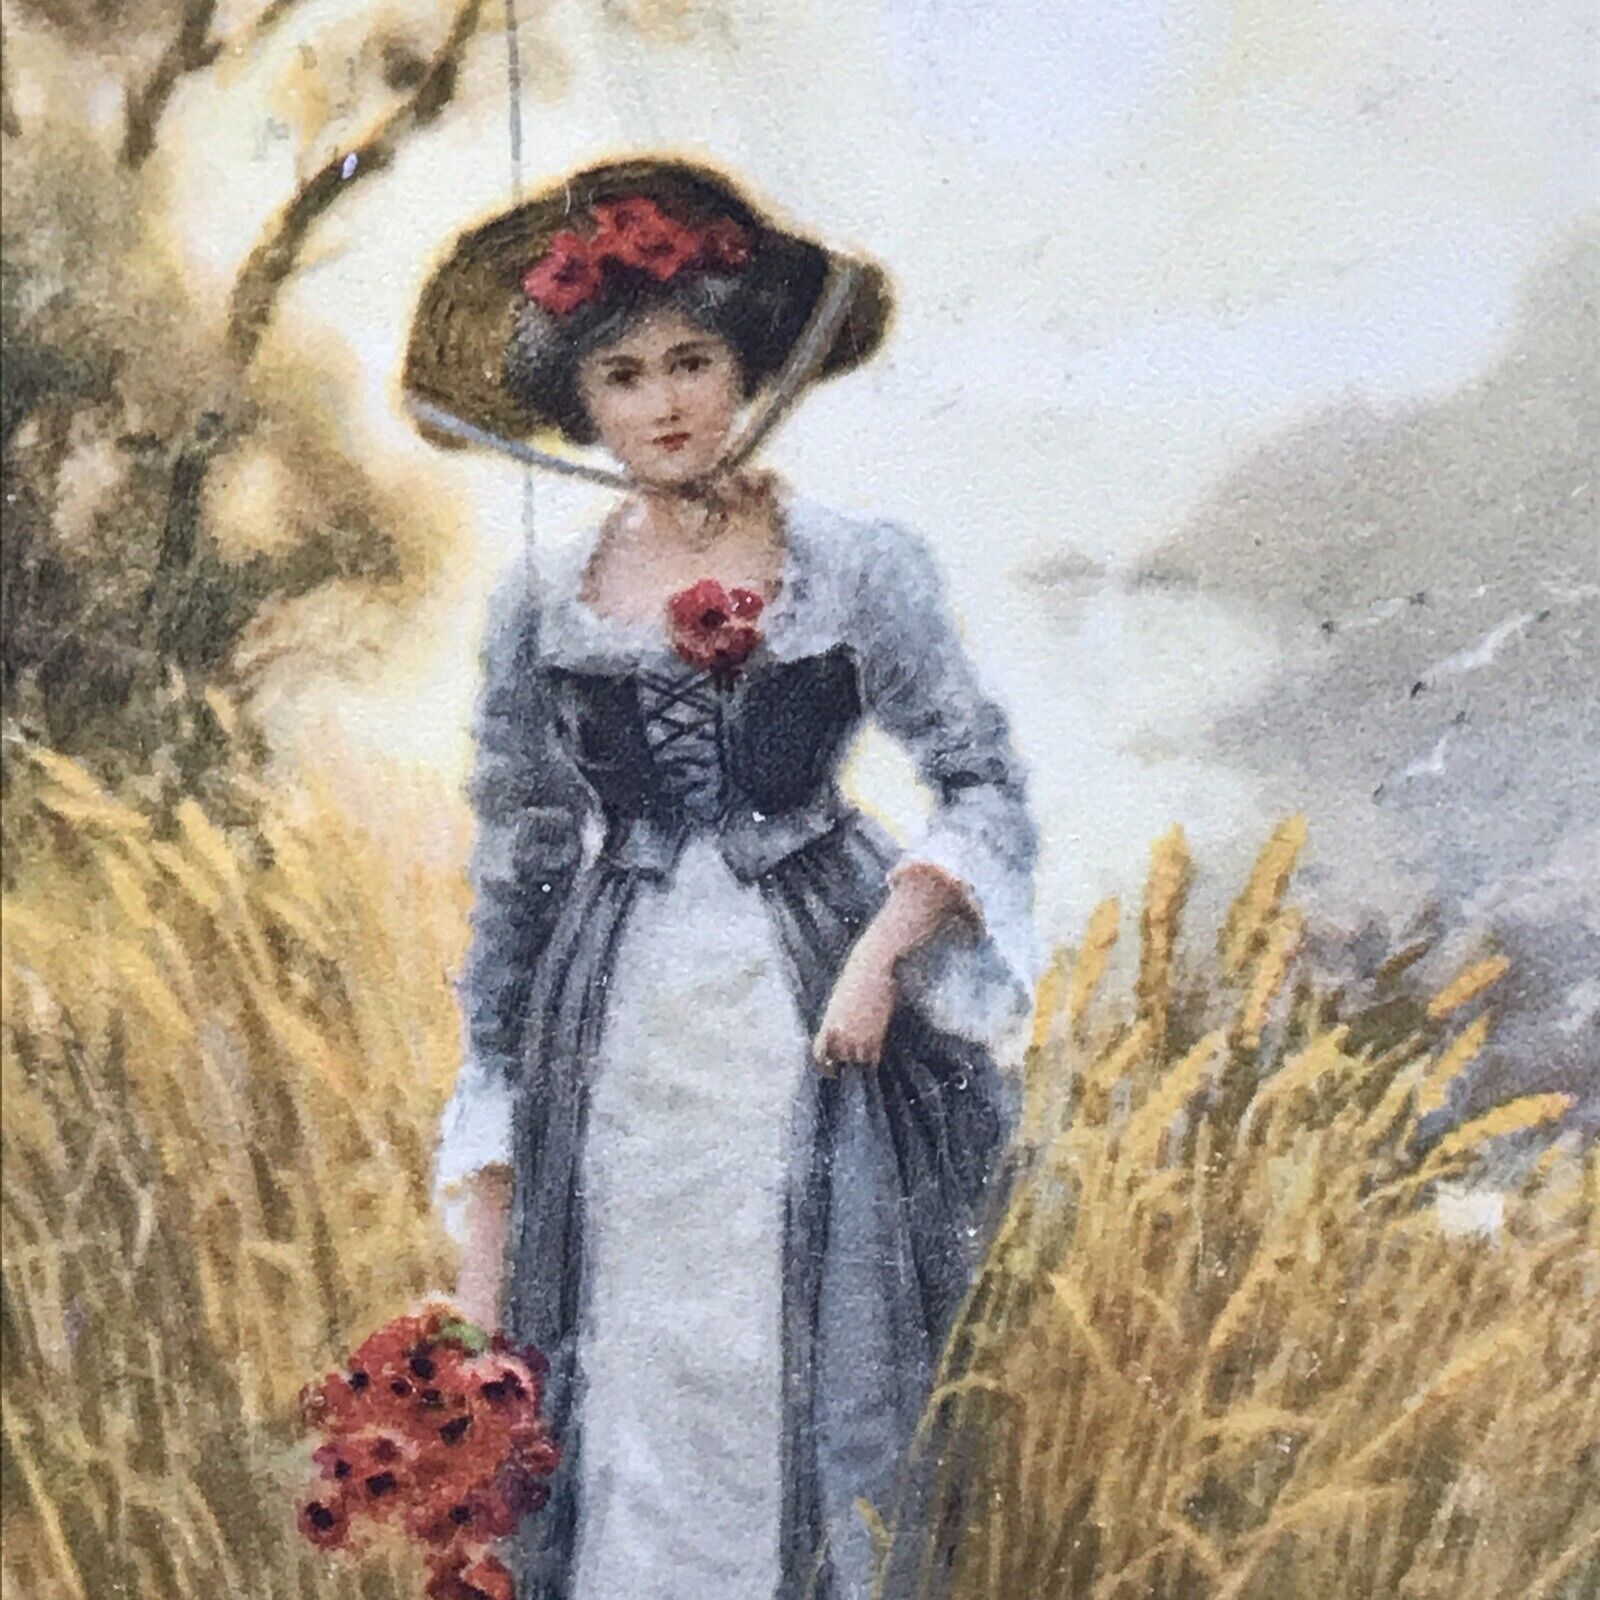 1917 Gorgeous Lady w/ Red Flowers in Victorian Dress Postcard France Postmark